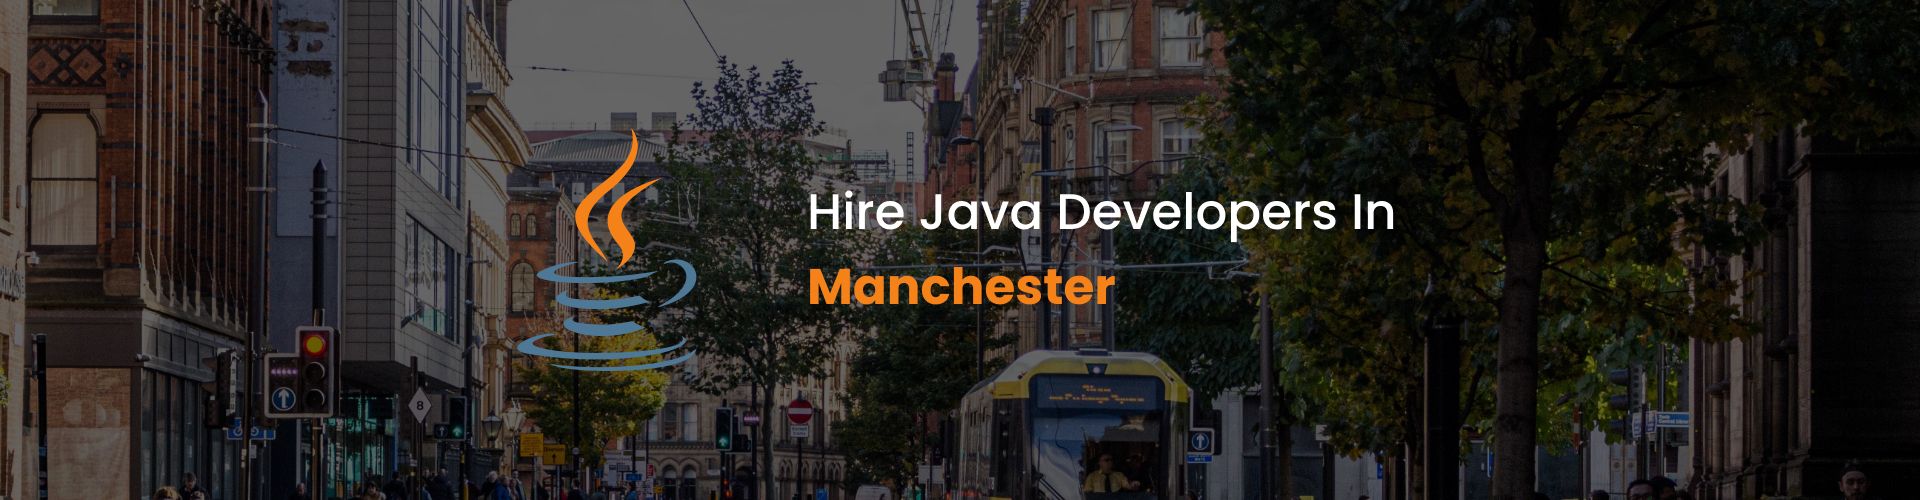 hire java developers in manchester